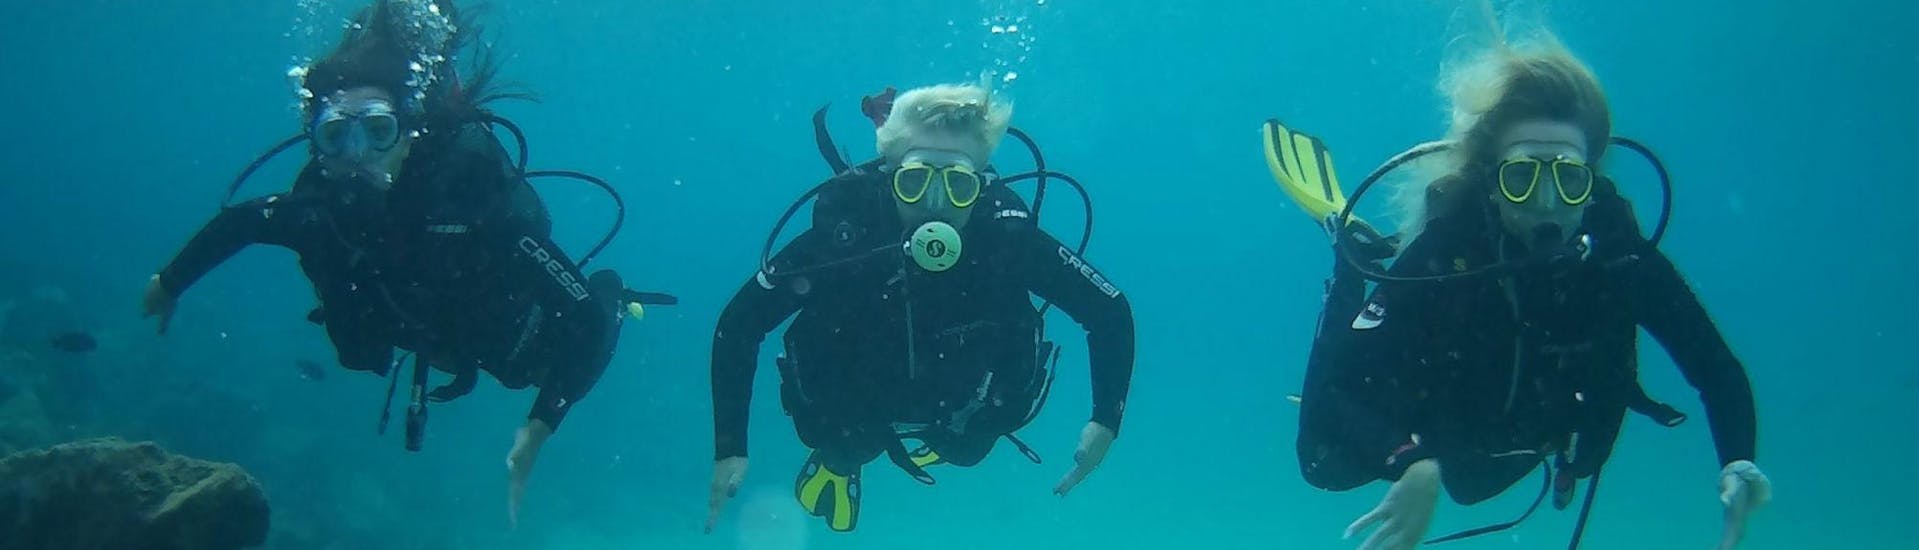 Trial Scuba Diving Course for Beginners in Lanzarote.